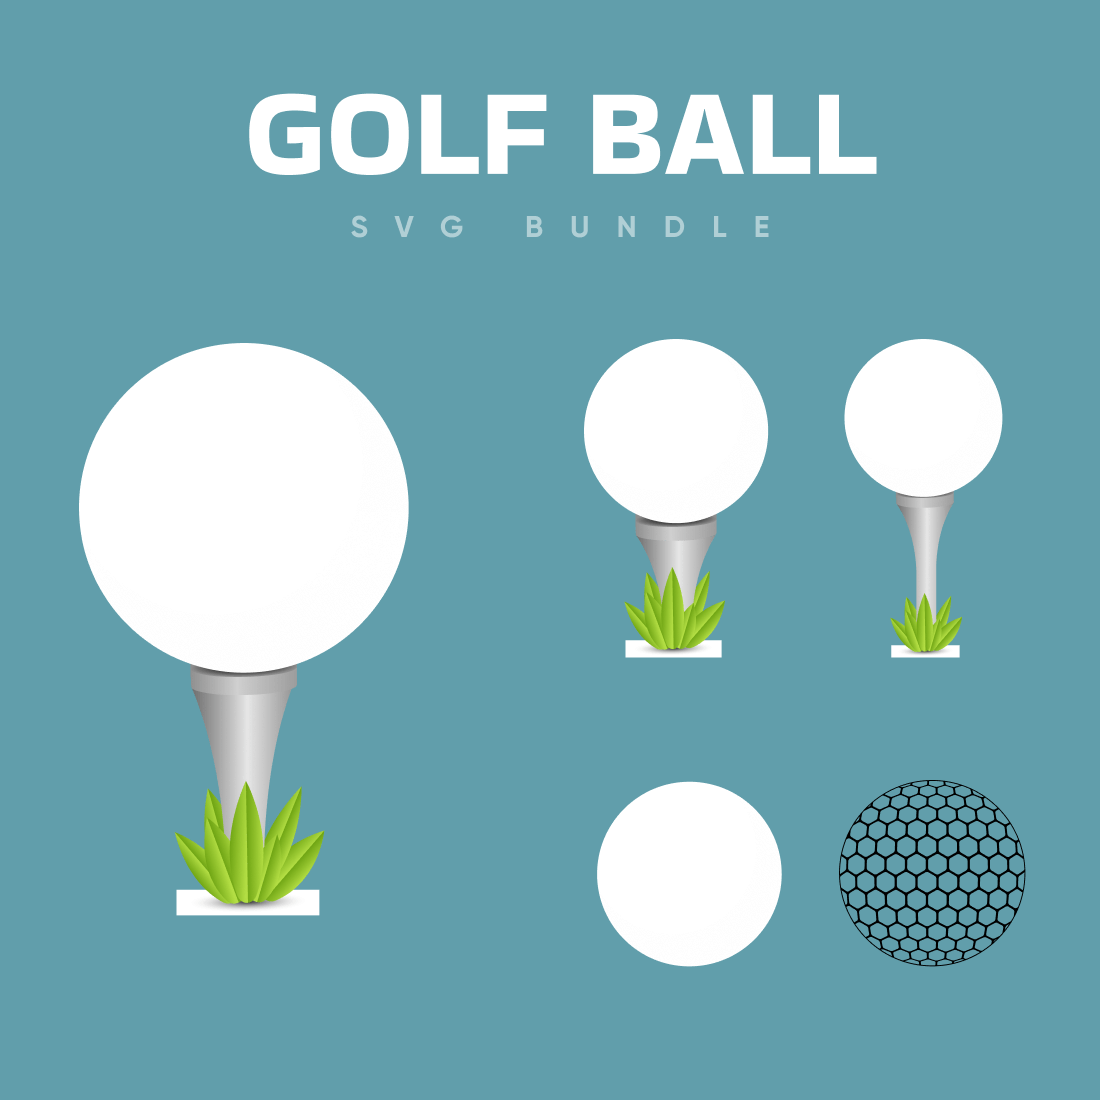 One large and four small golf balls.